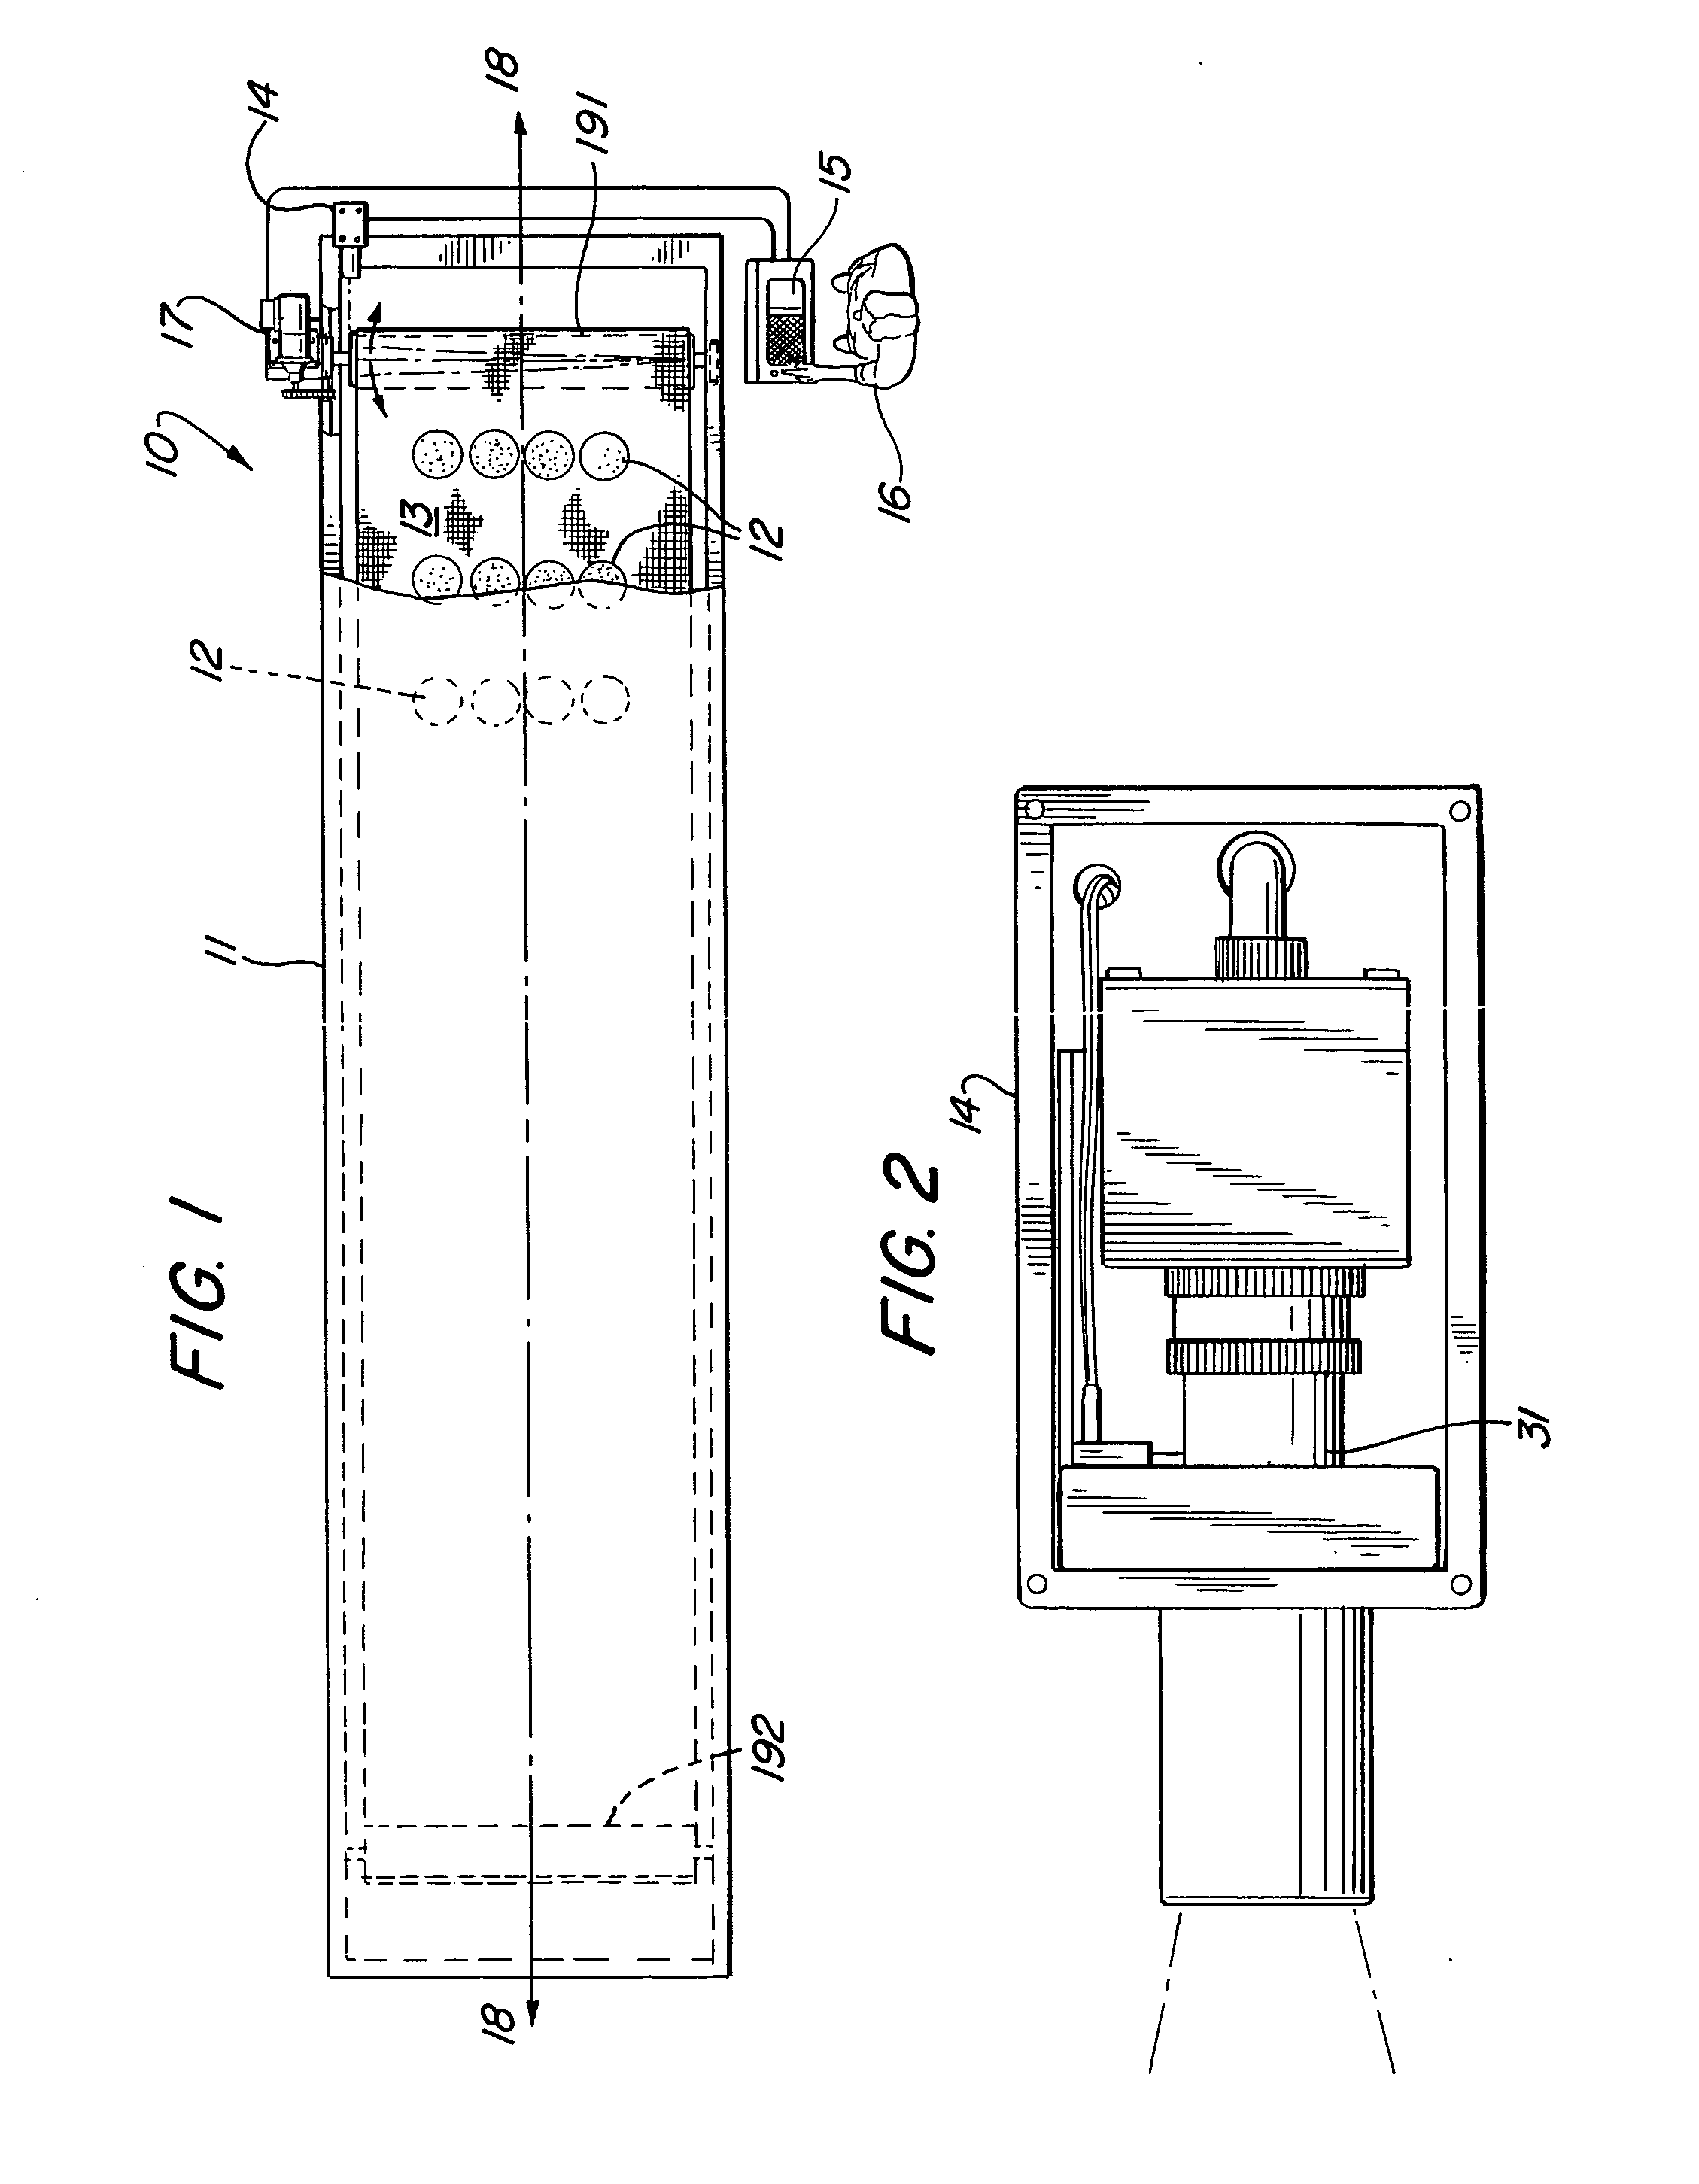 Oven conveyor alignment system apparatus and method